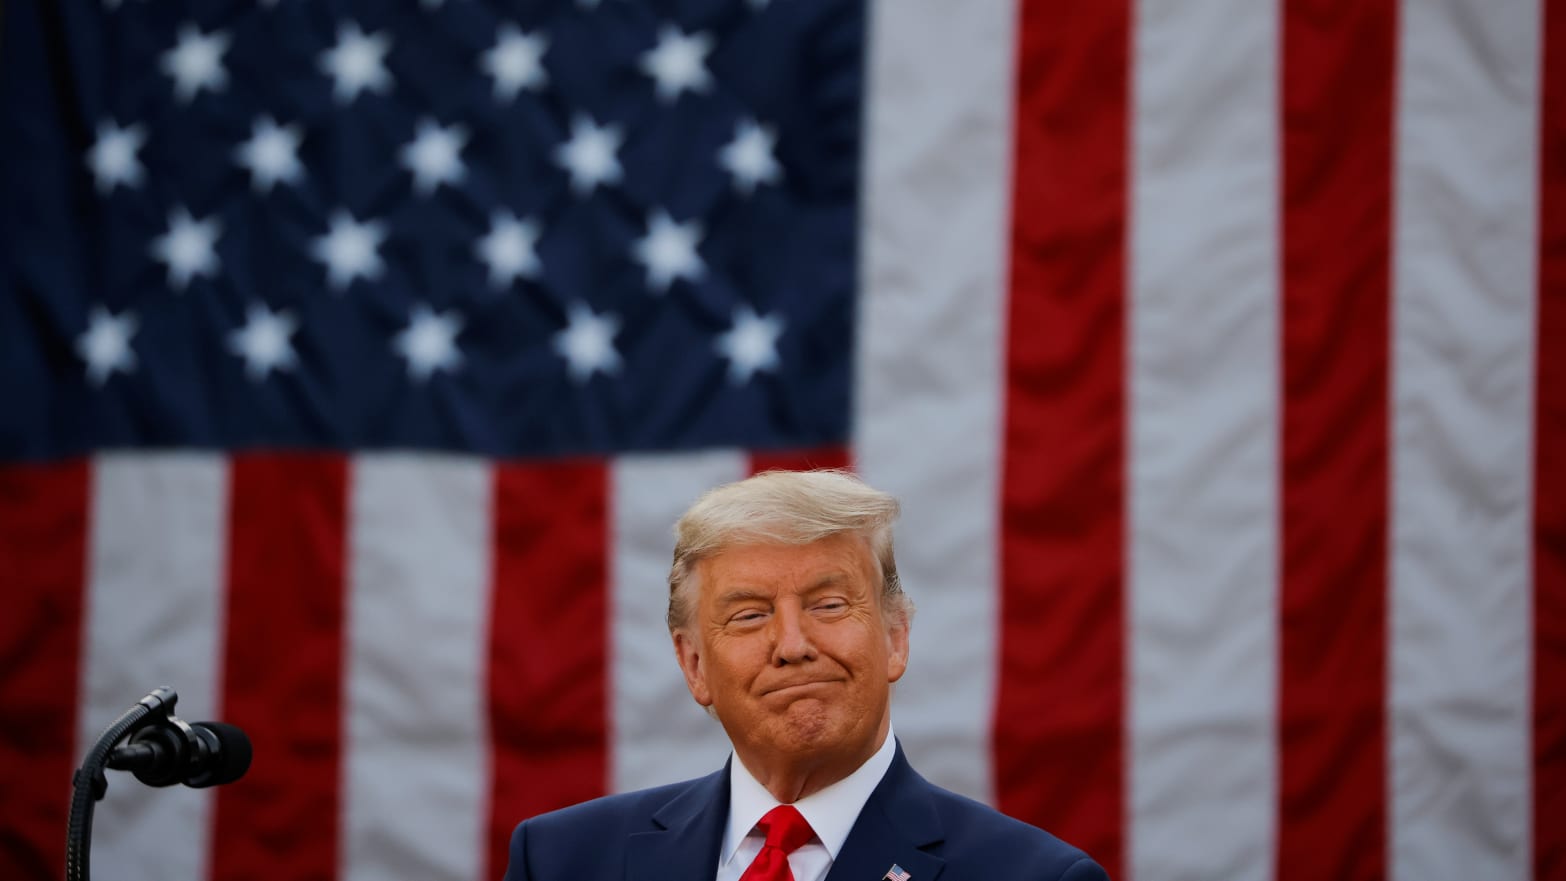 Donald Trump stands in front of a massive American flag.